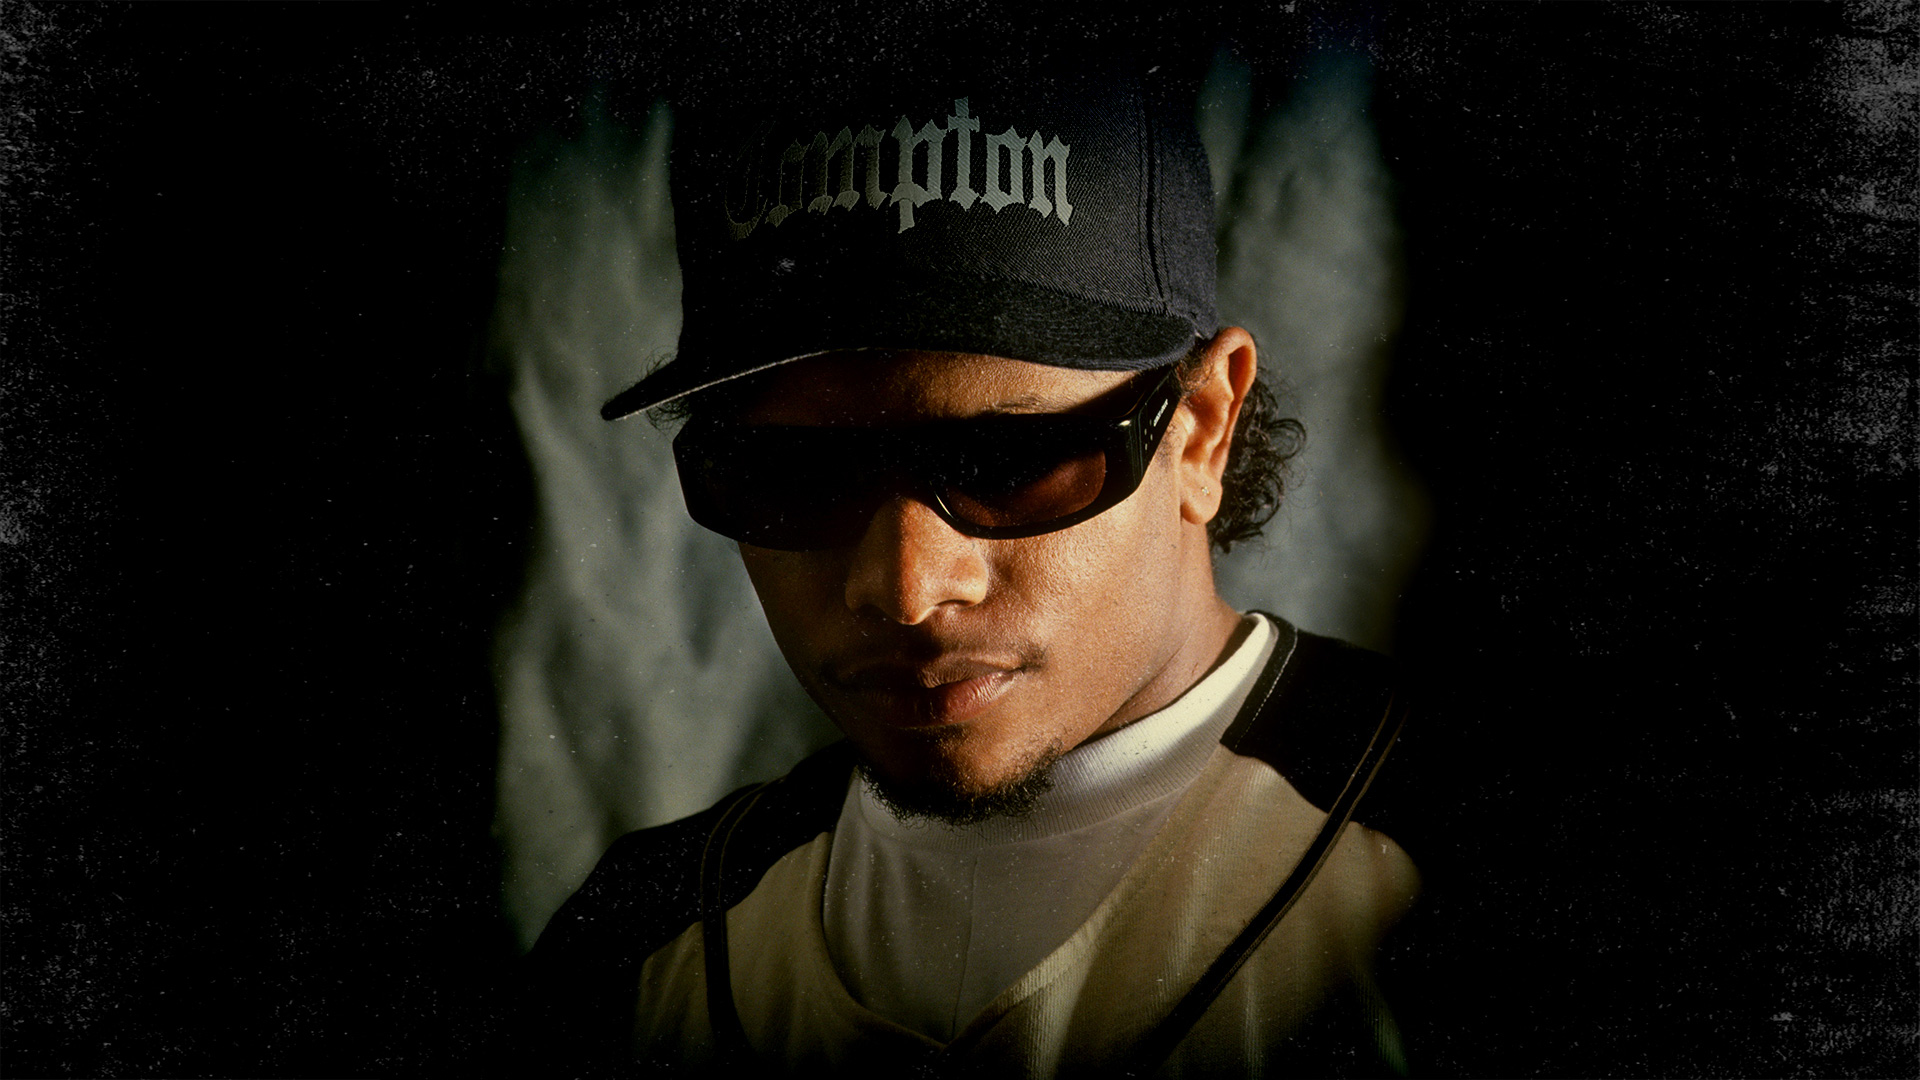 Watch The Mysterious Death of Eazy-E Season 1 Episode 1 | Stream Full Episodes